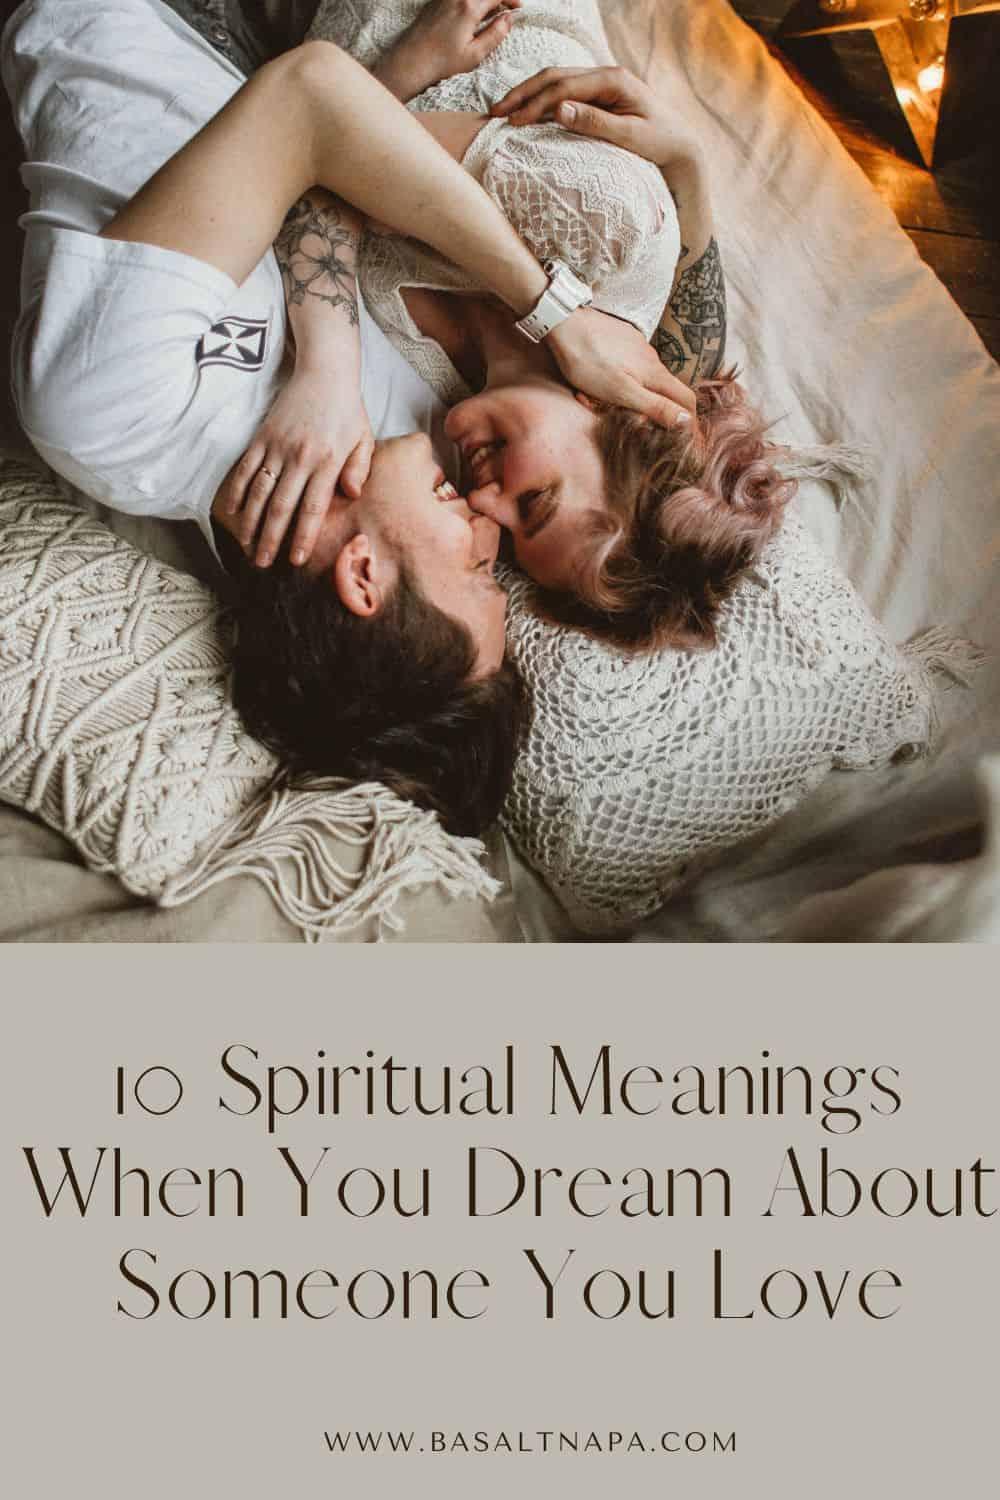 10 Spiritual Meanings When You Dream About Someone You Love